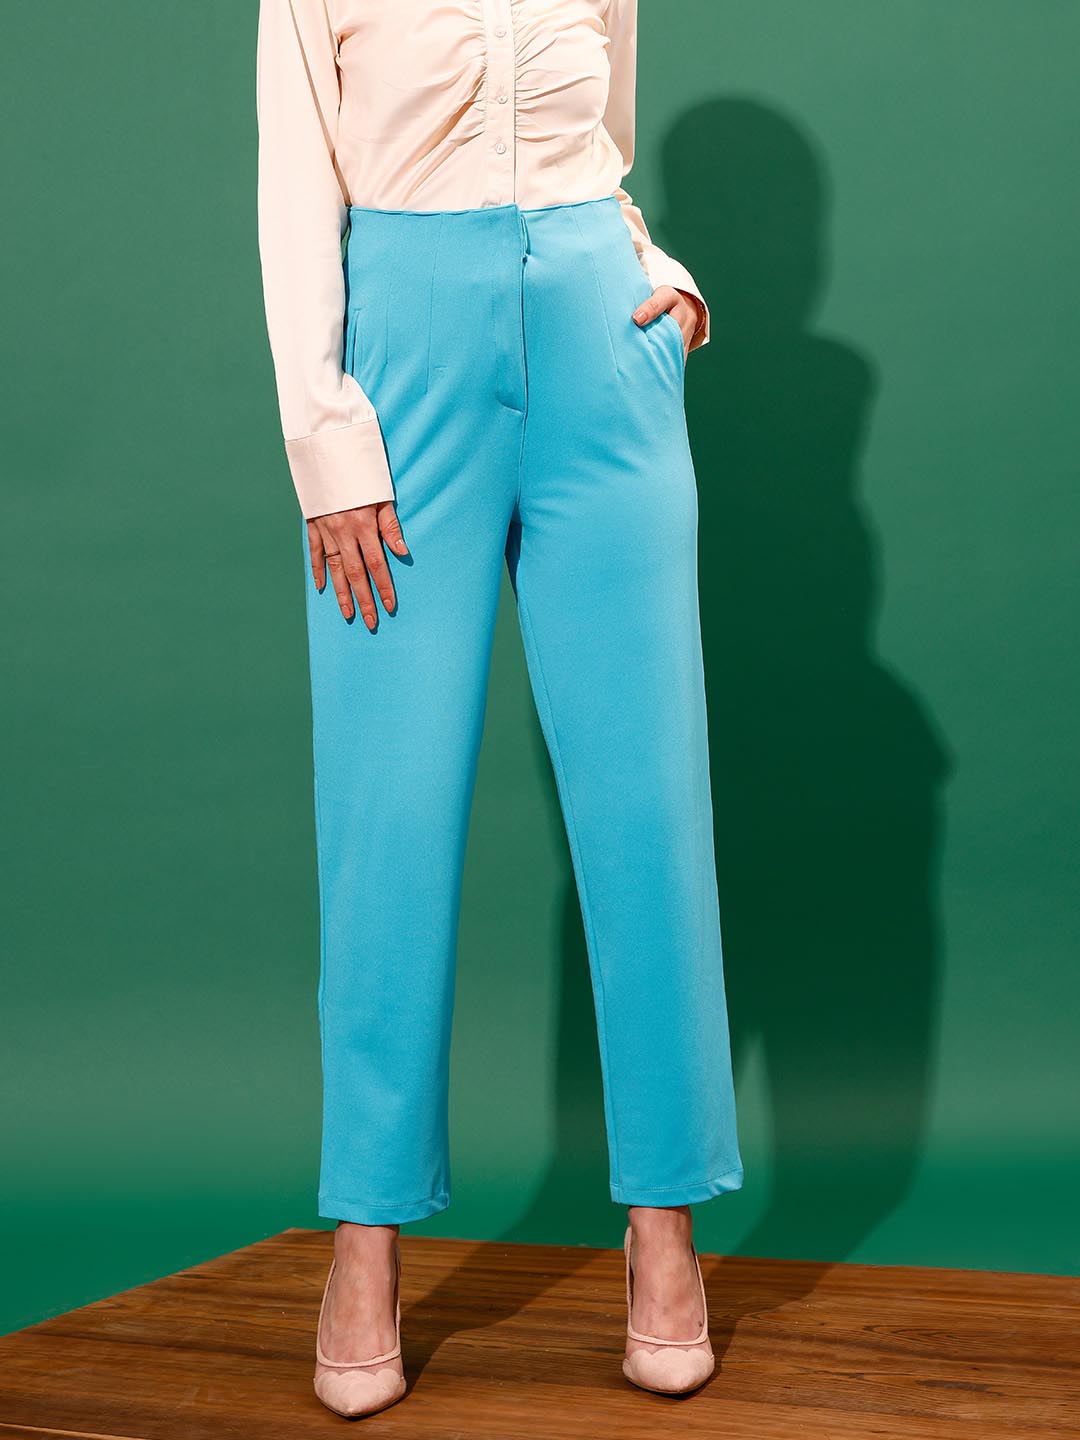 High-waisted tailored trousers - Dark khaki green - Ladies | H&M IN